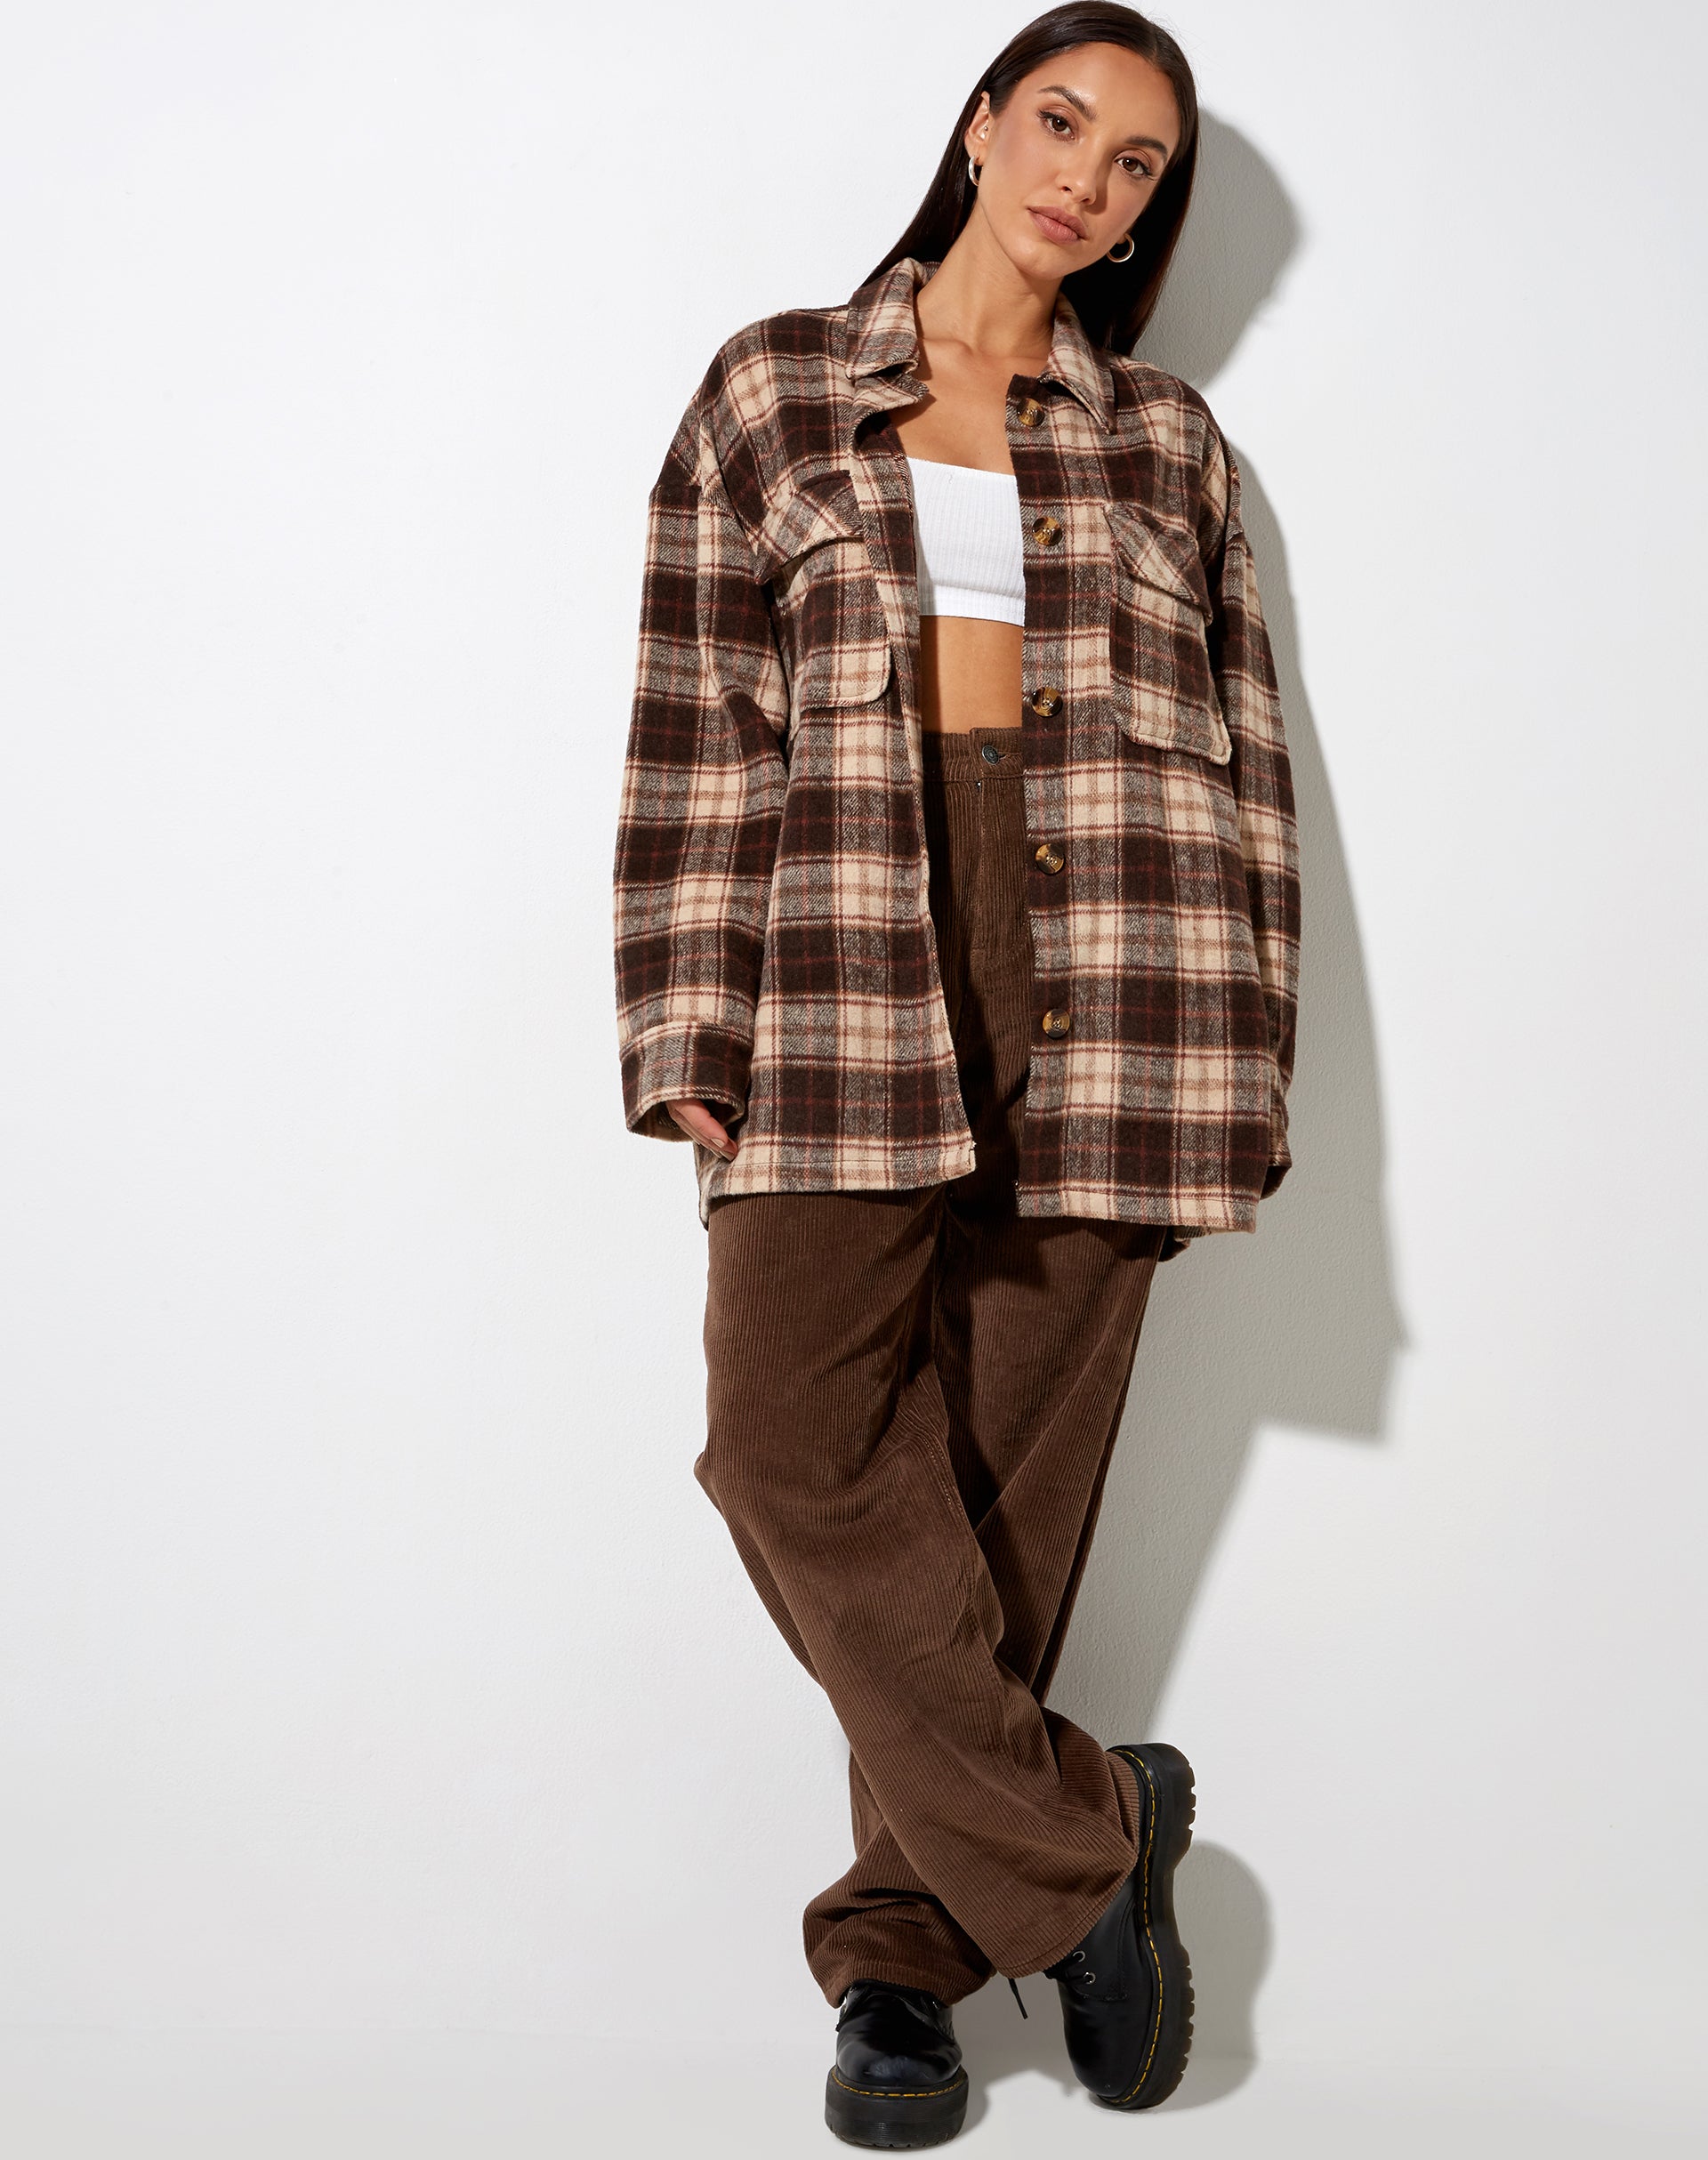 Image of Marcella Shirt in Brown and Cream Check